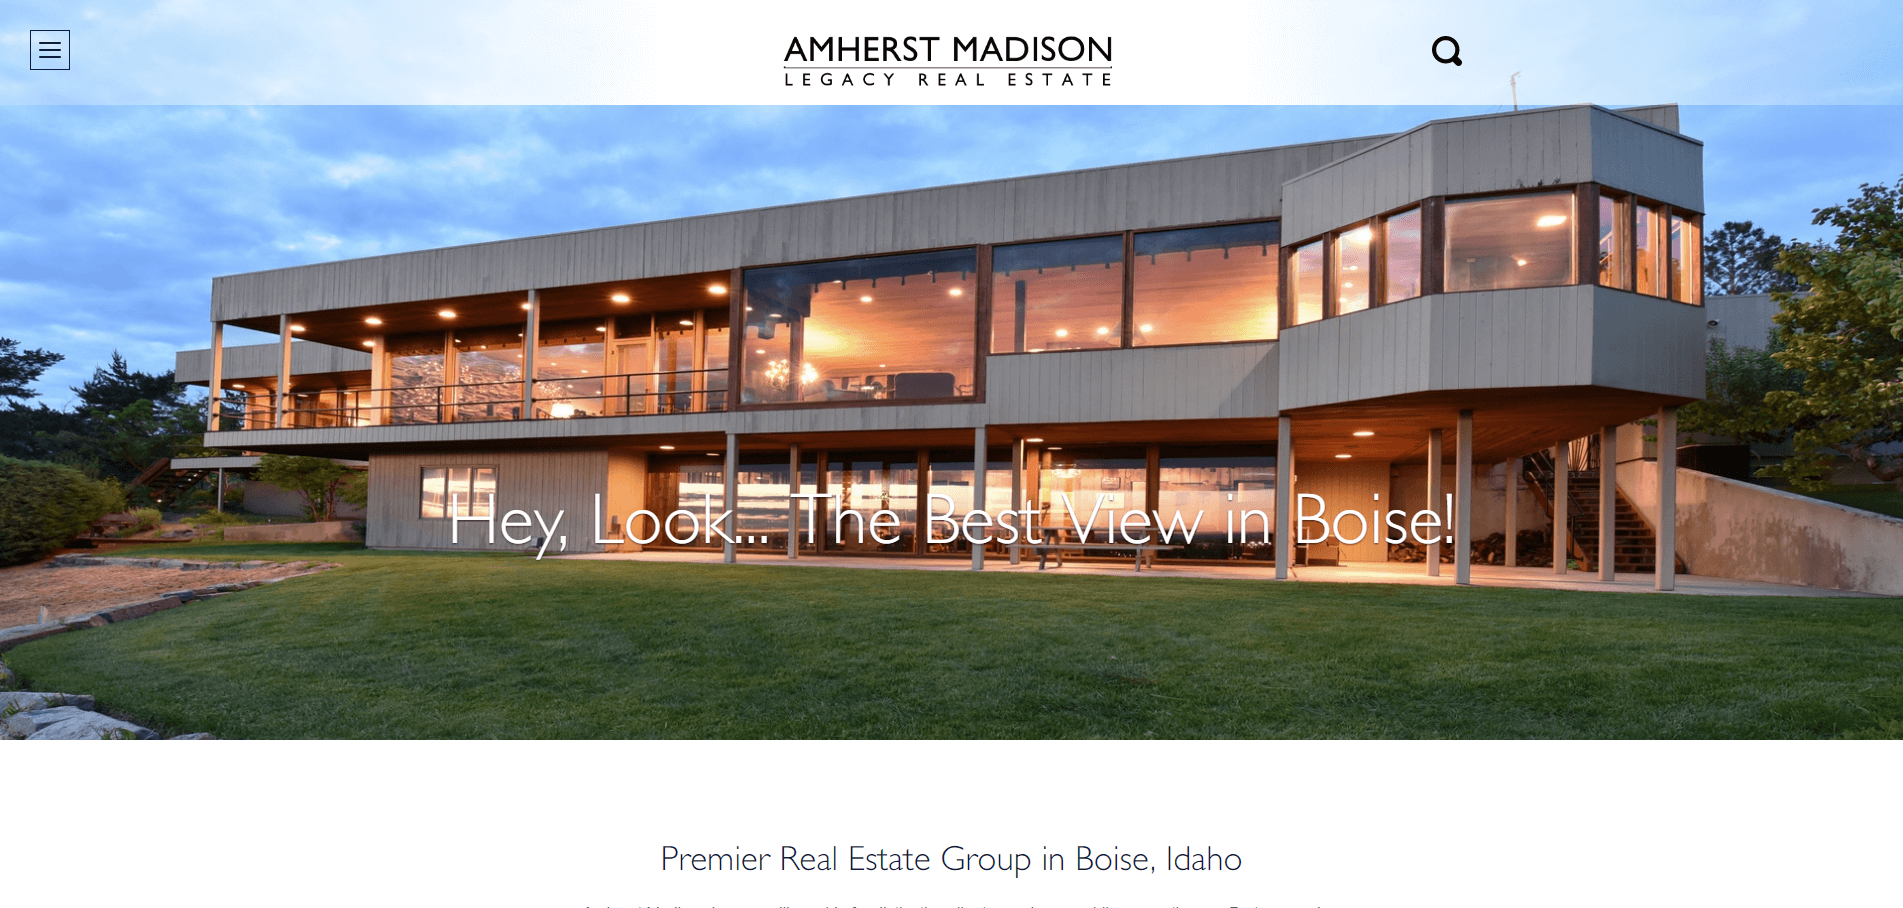  Whoa!  This is a list of the 101 best real estate websites.  We reviewed and ranked each site, 1-101.  Here's amherstmadisonlegacy.com.  Curious who made the list? 